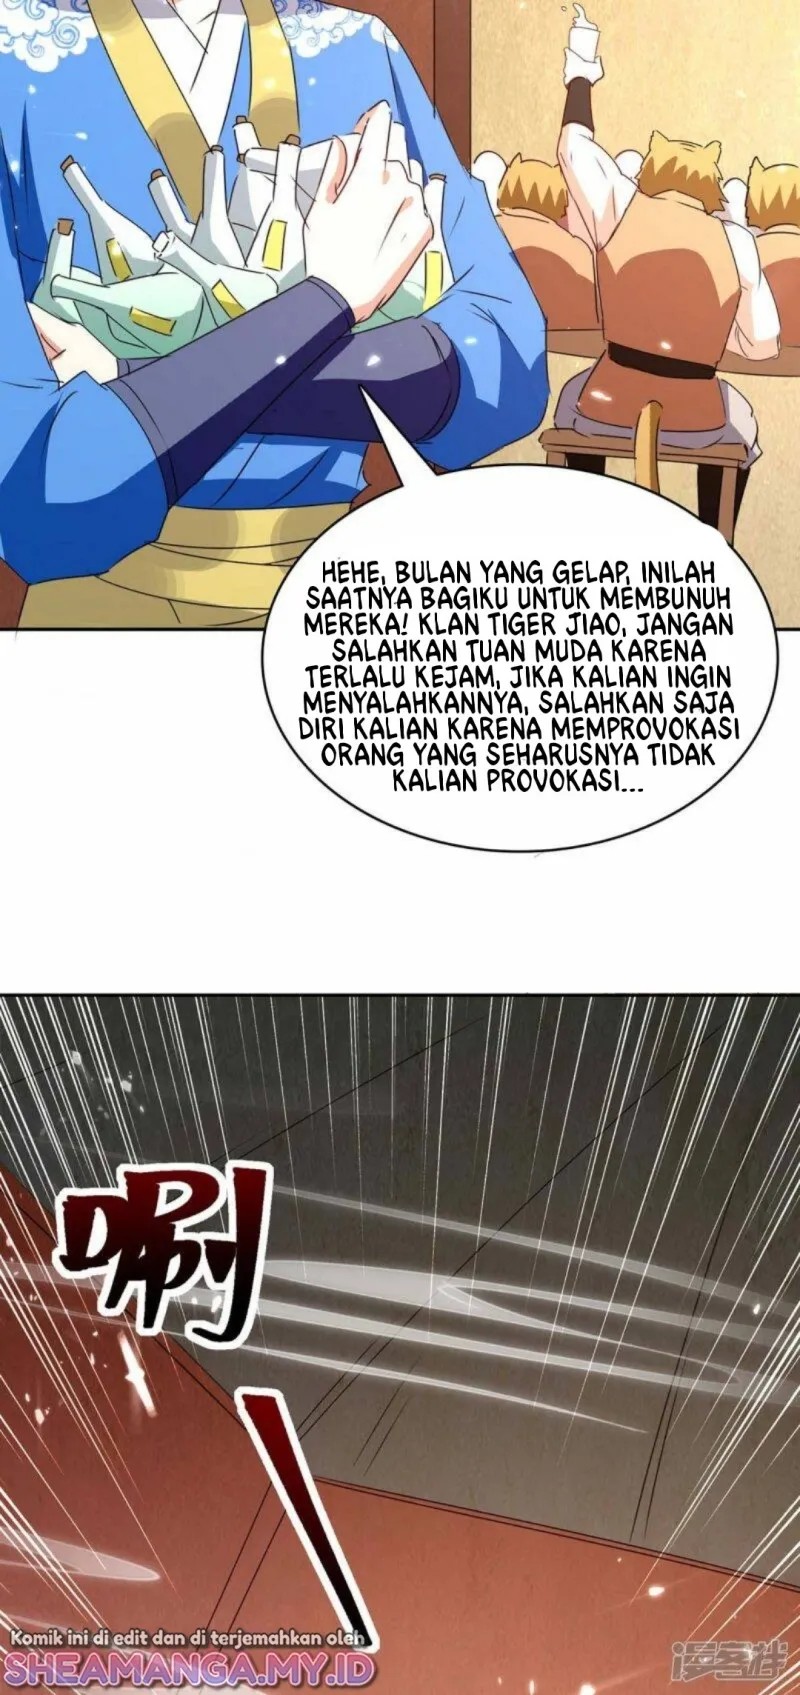 Strongest Leveling Chapter 296